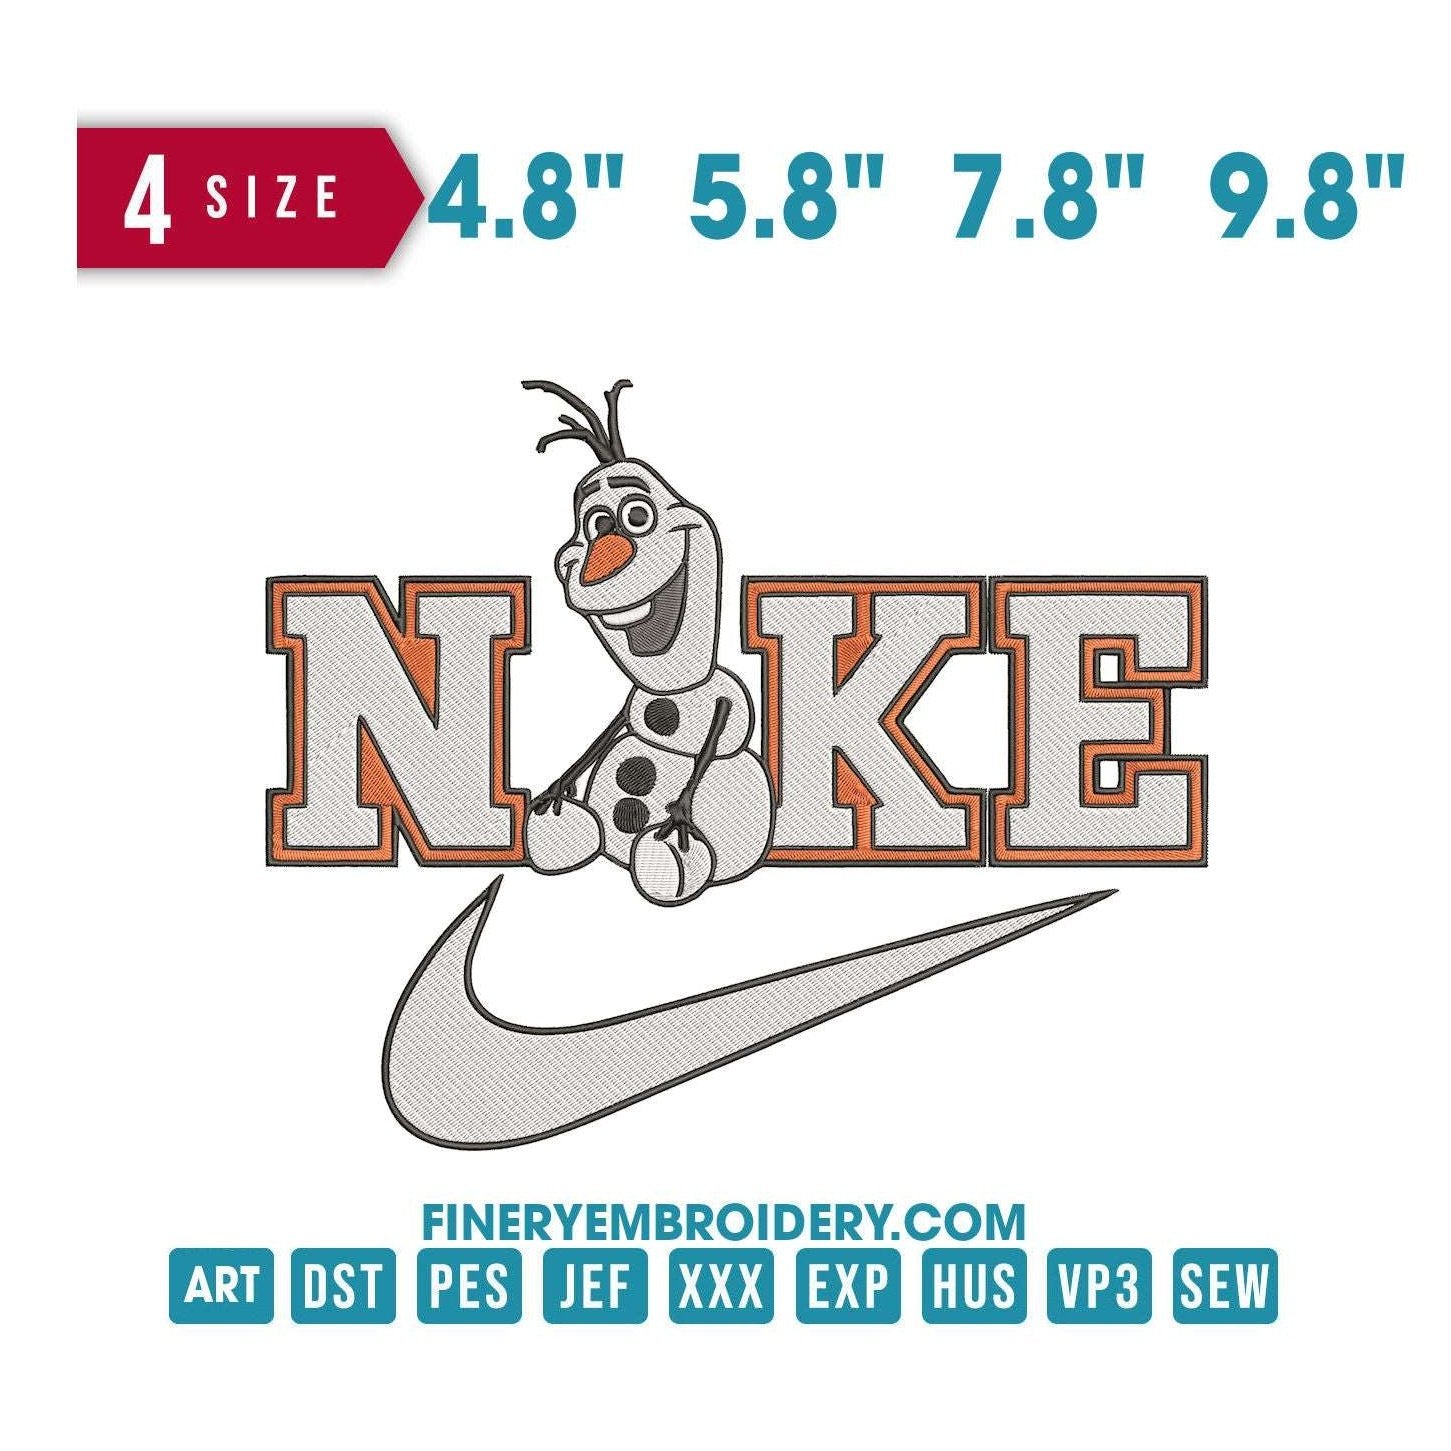 Nike Olaf - Embroidery Design FineryEmbroidery